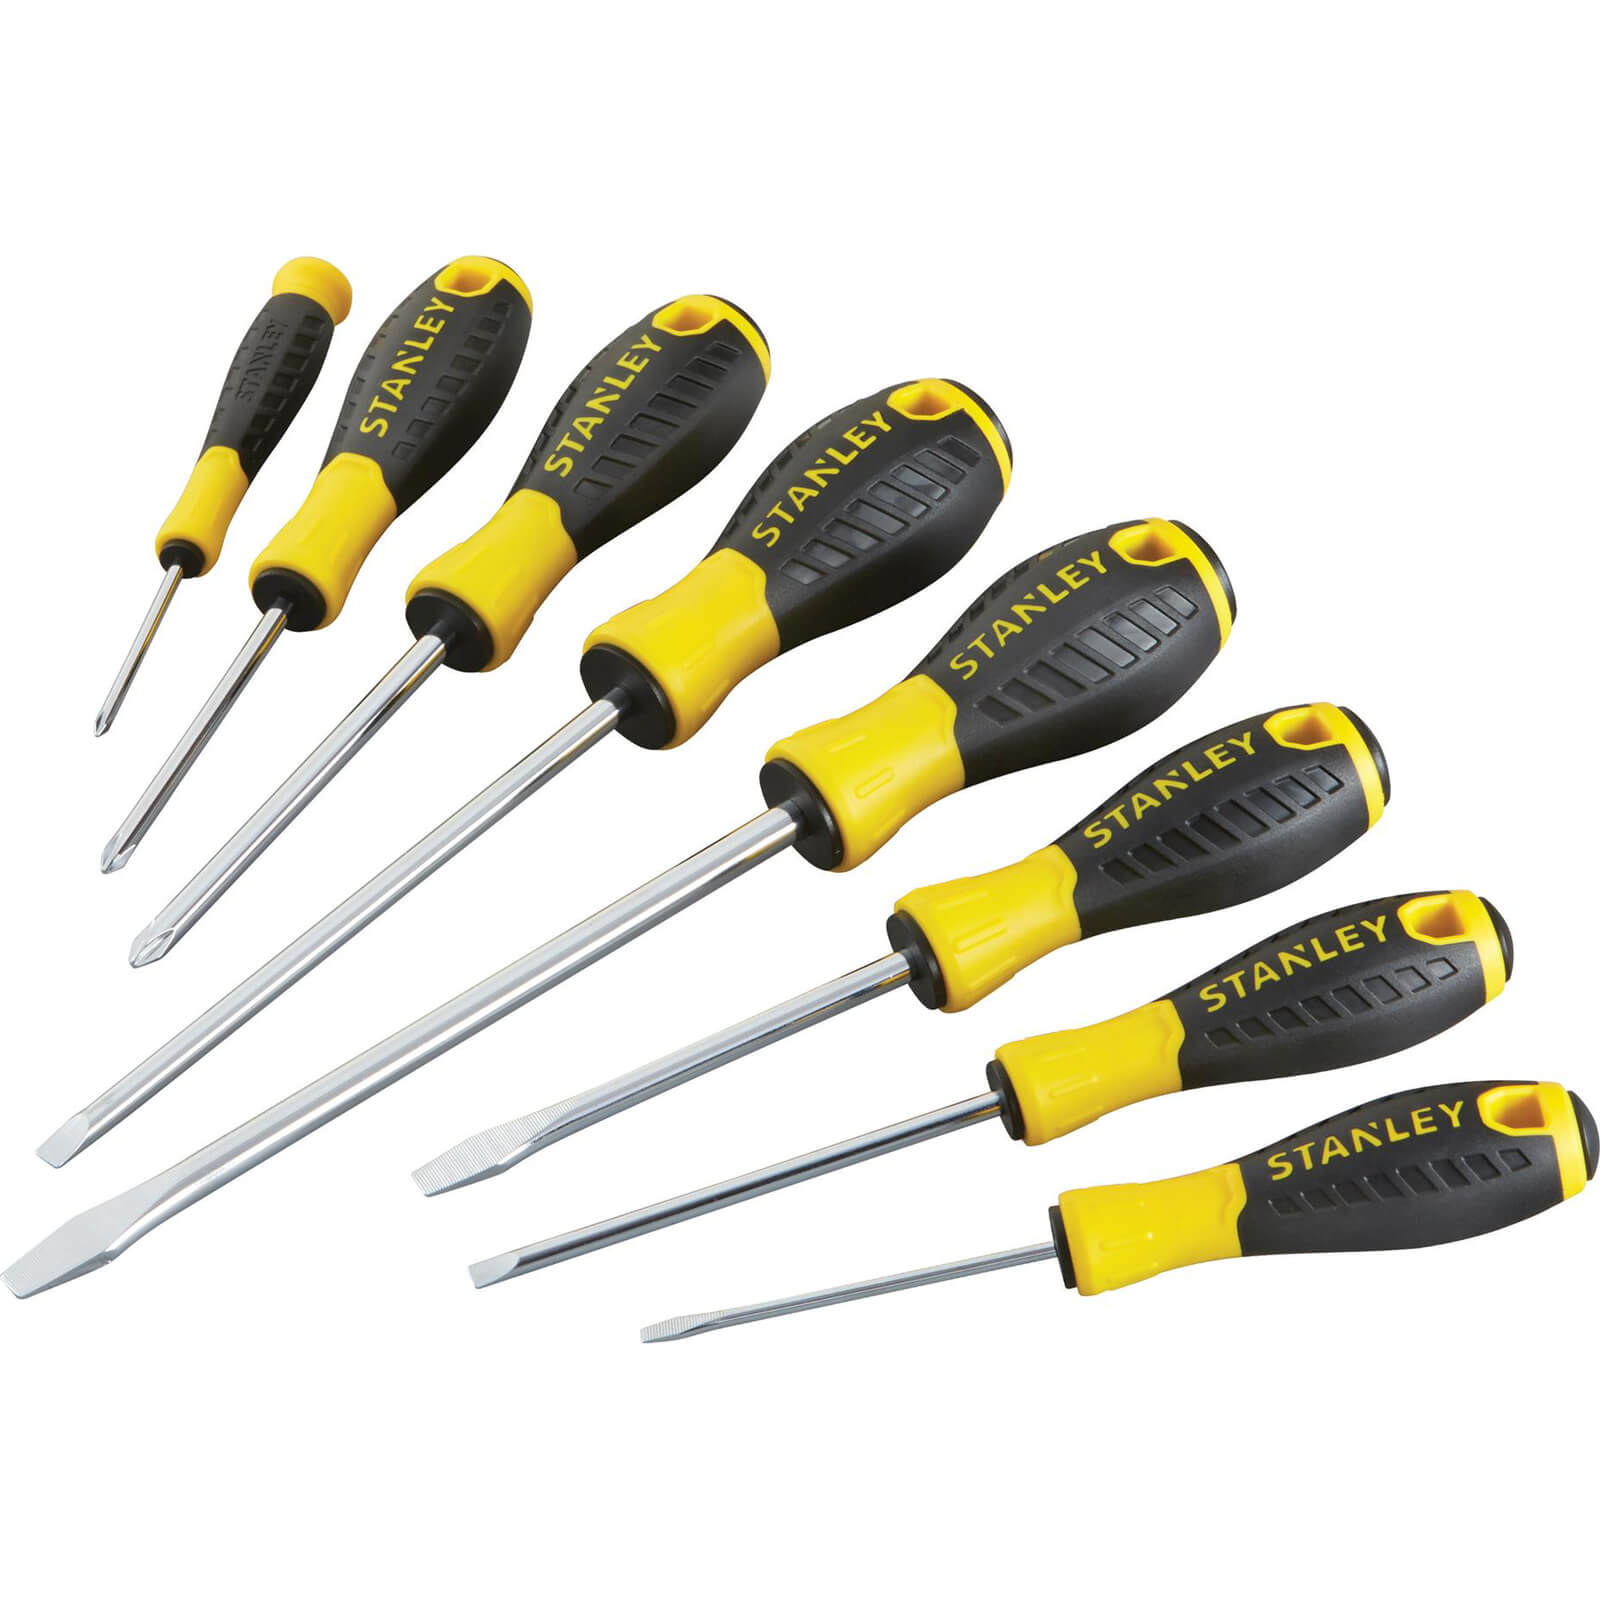 Image of Stanley 8 Piece Essential Phillips and Slotted Screwdriver Set